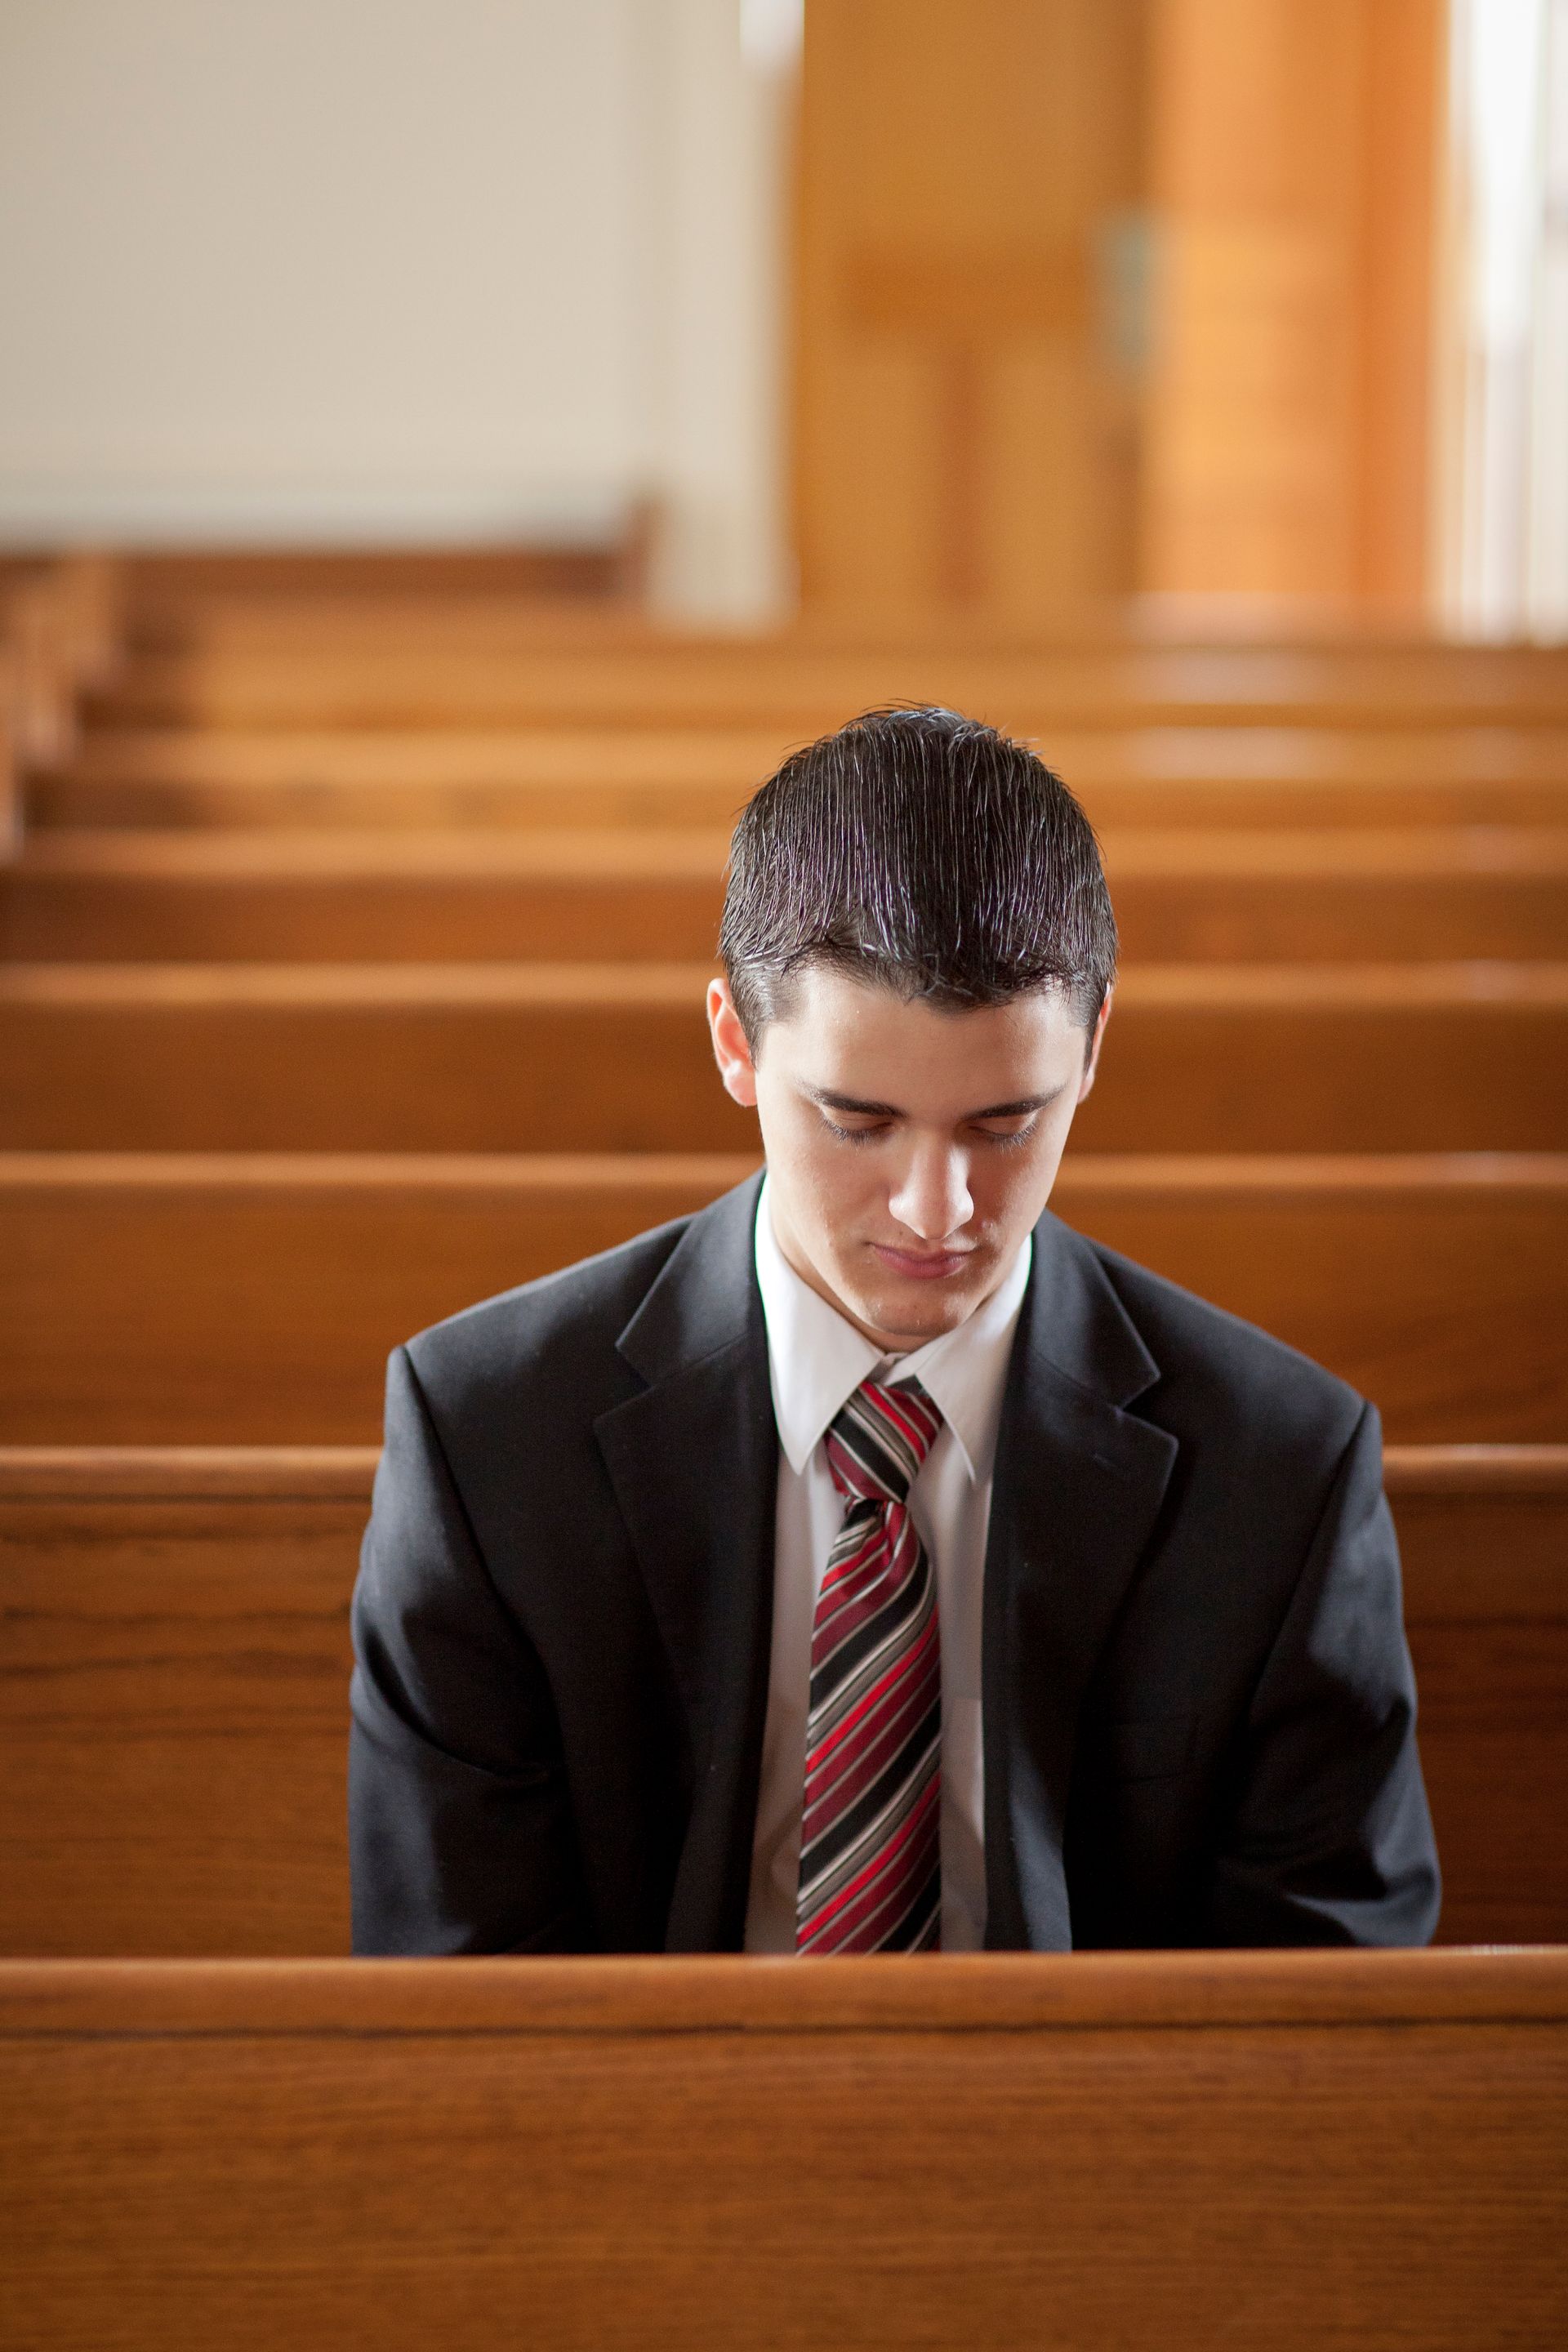 A young man prays in the chapel.